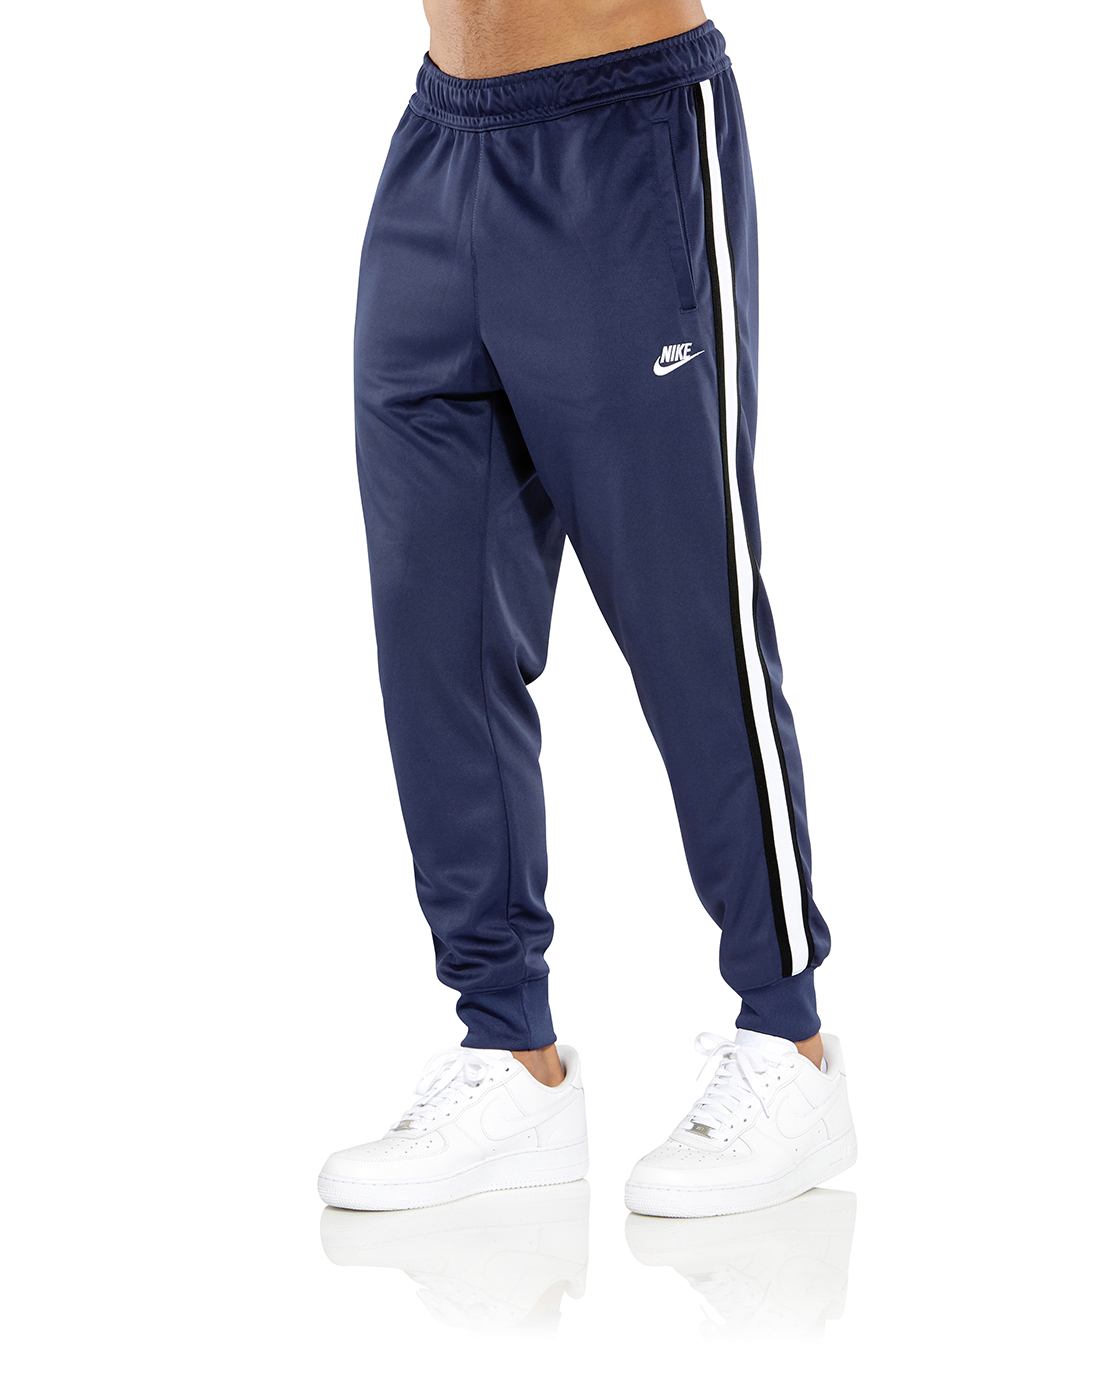 Nike Mens Tribute Joggers - Navy | Life Style Sports IE